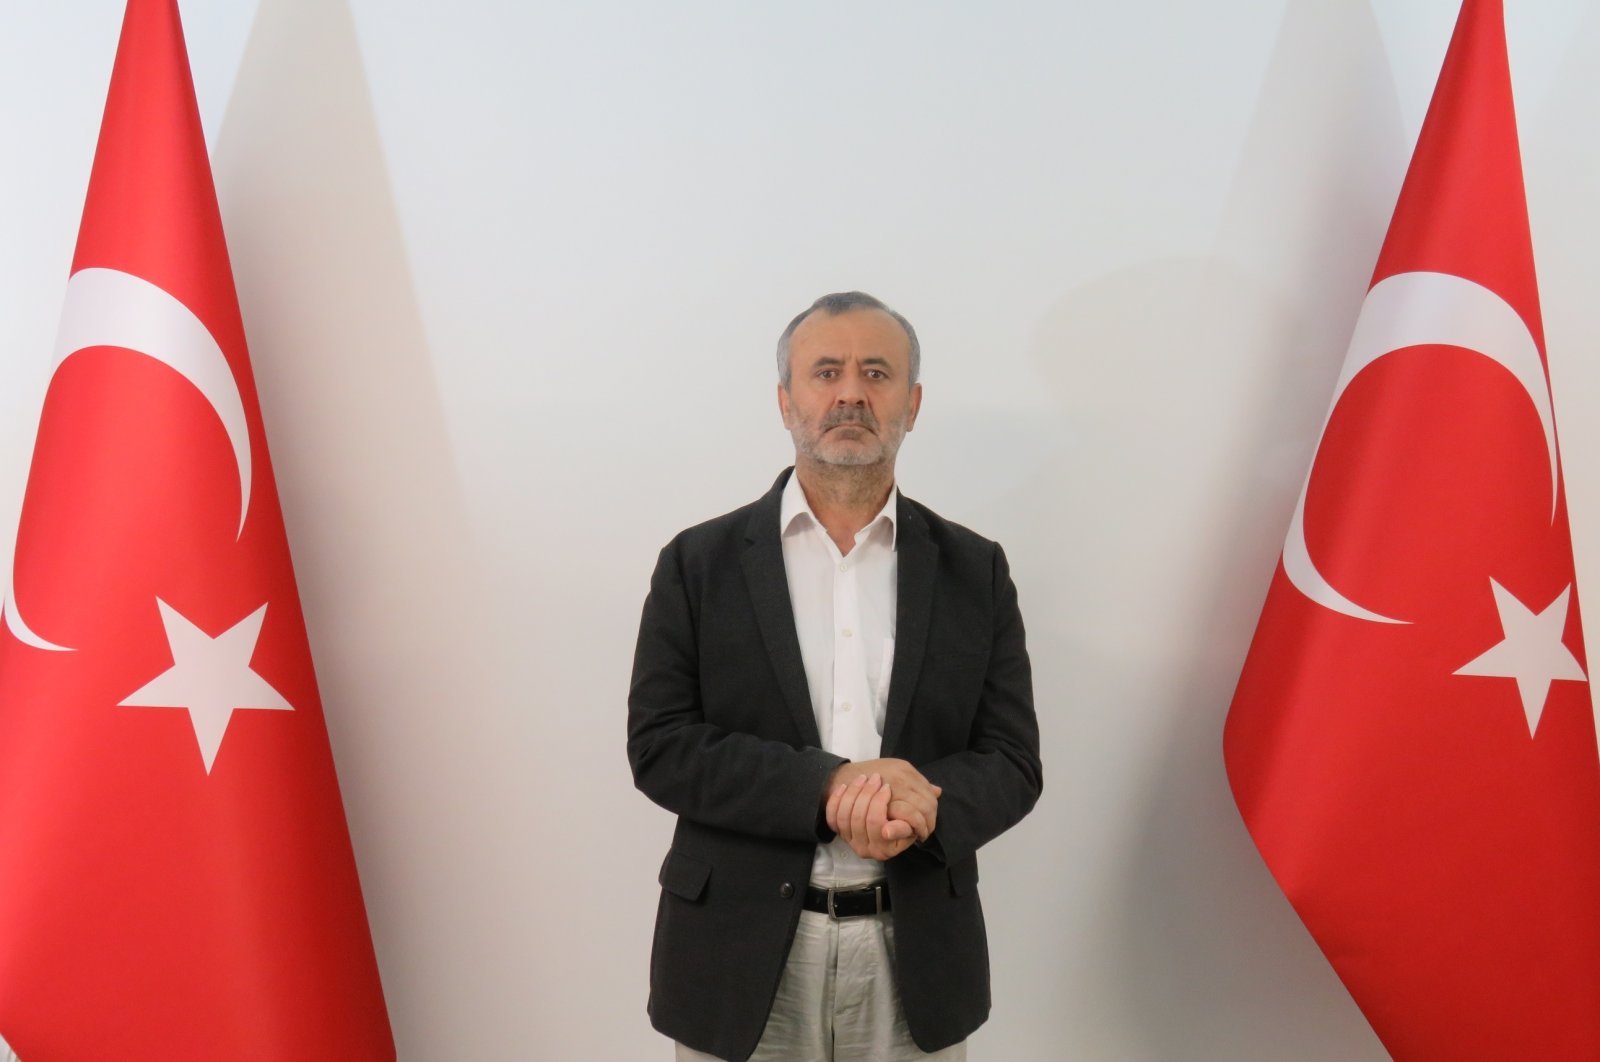 Orhan Inandı poses between two Turkish flags in this photo handed out to the media after he was brought to Turkey, July 5, 2021. (AA Photo)